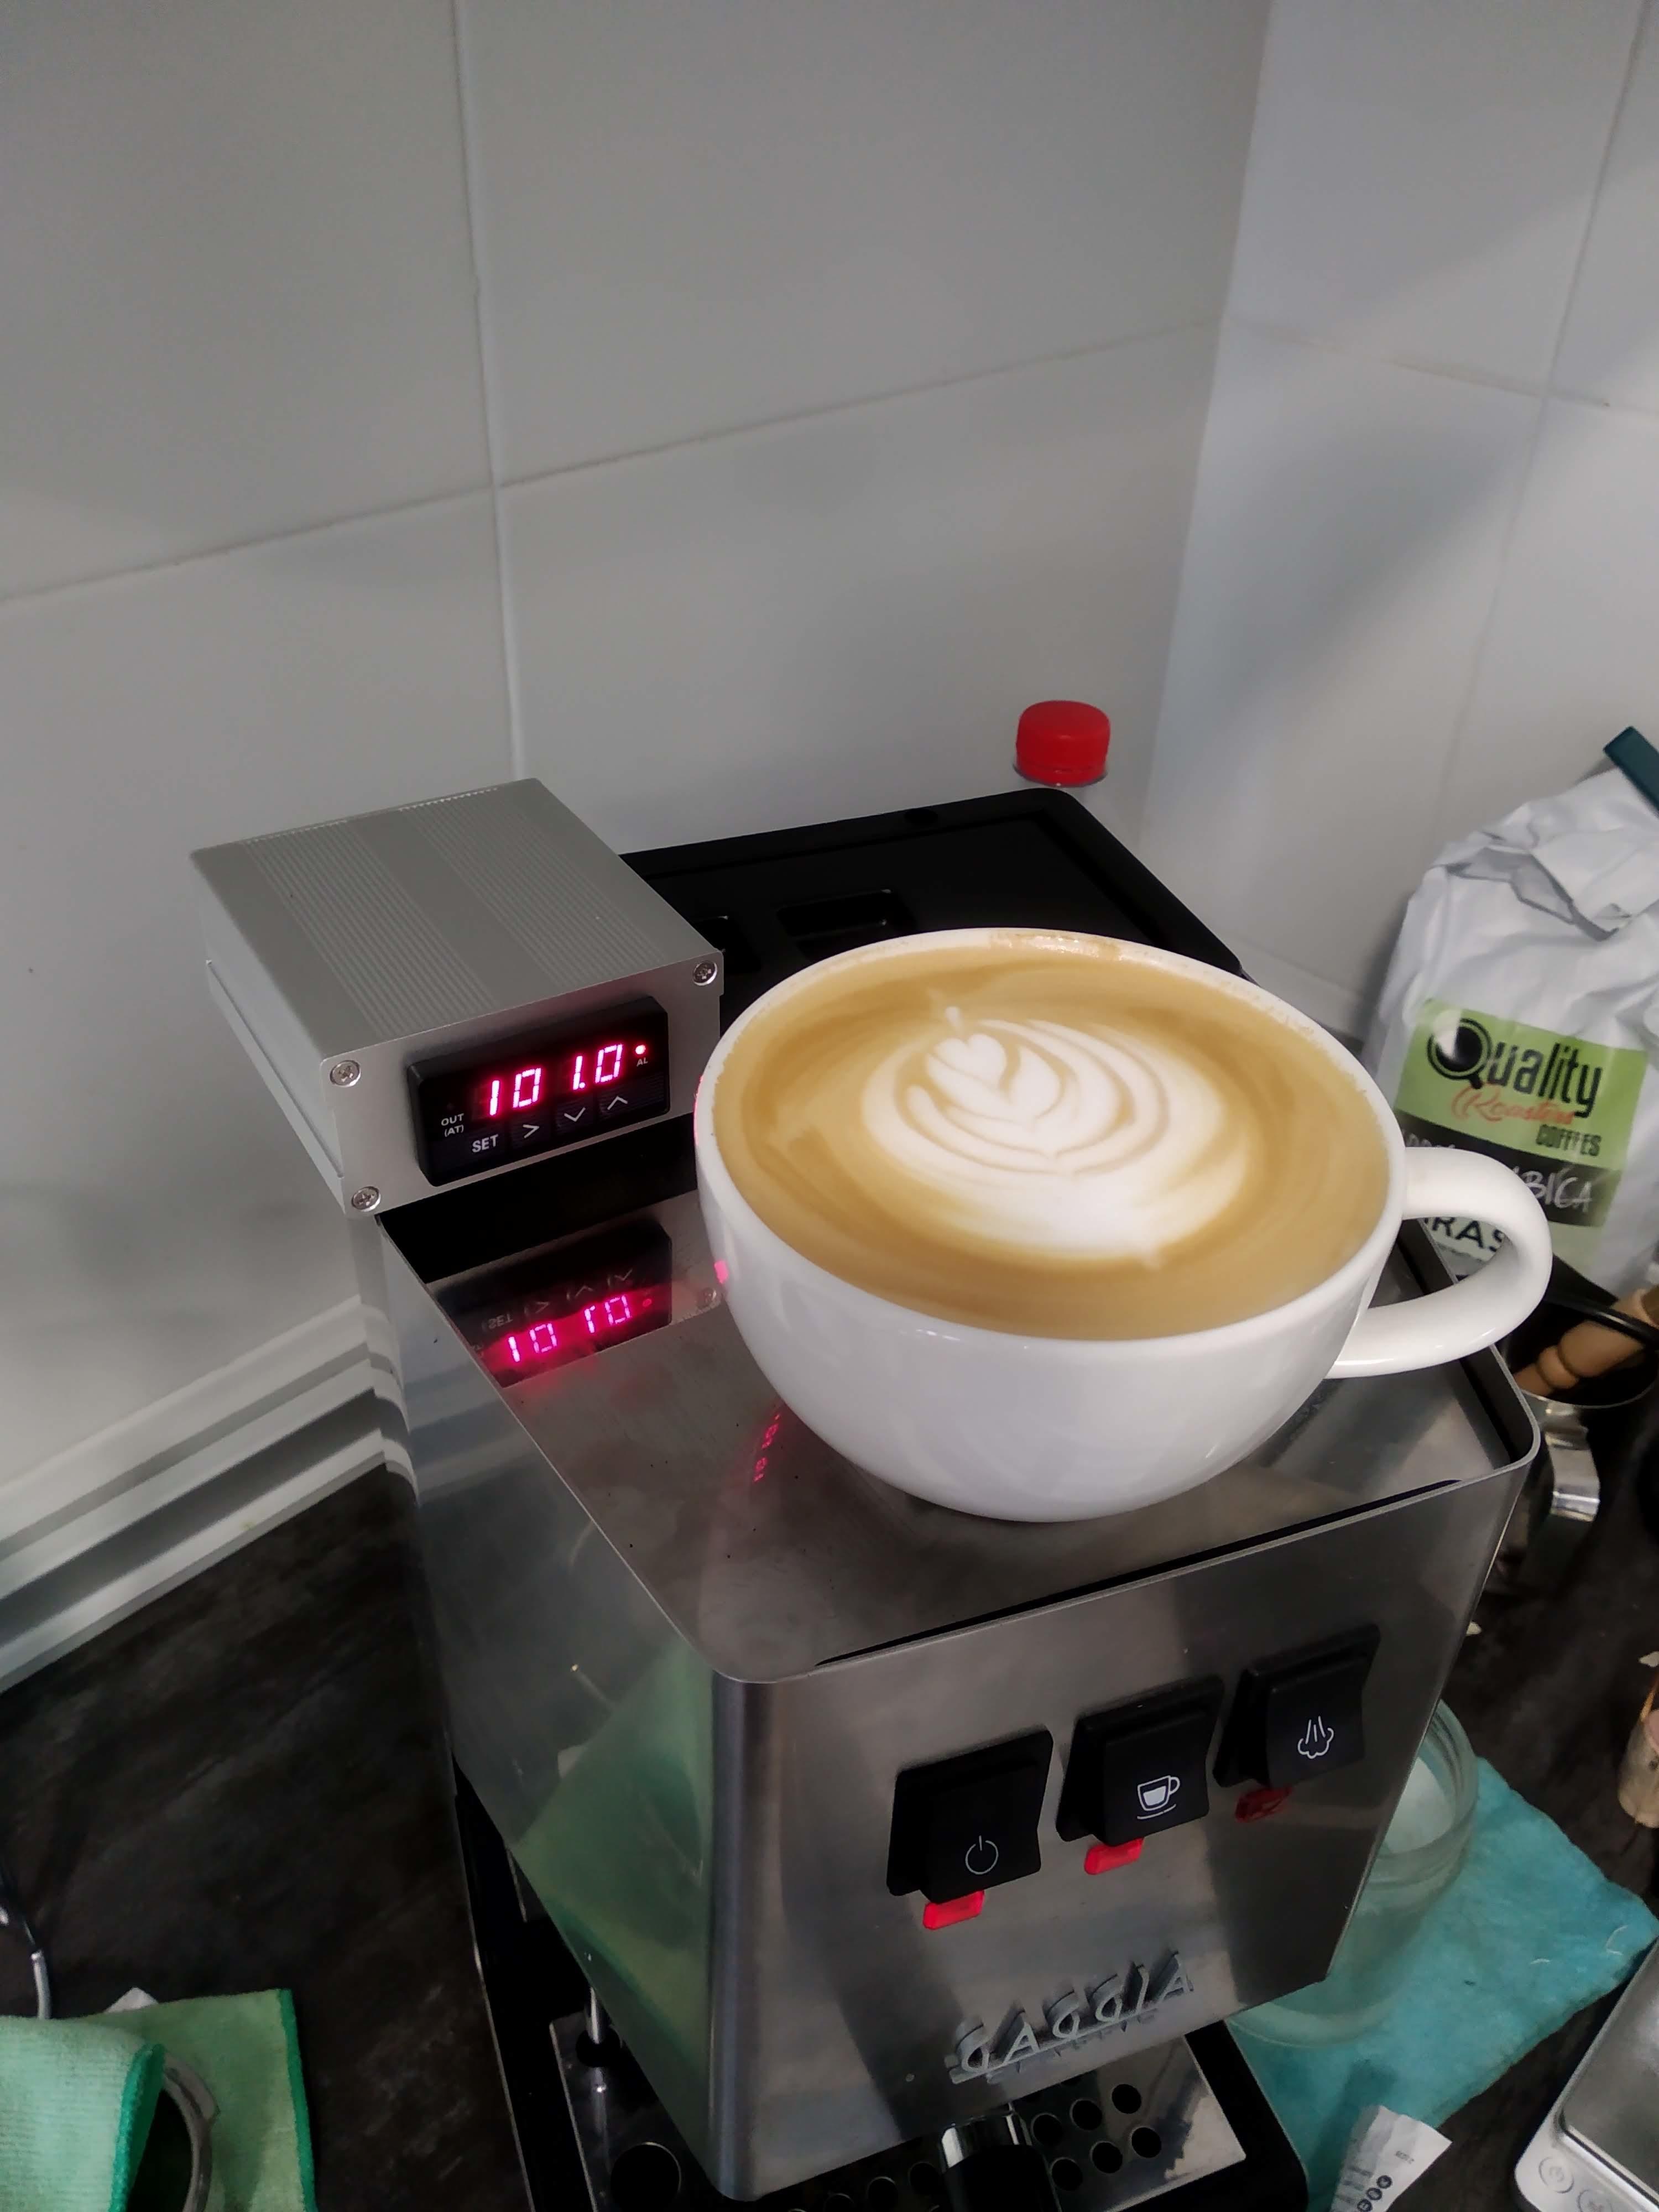 Classic 2019 with PID and latte art